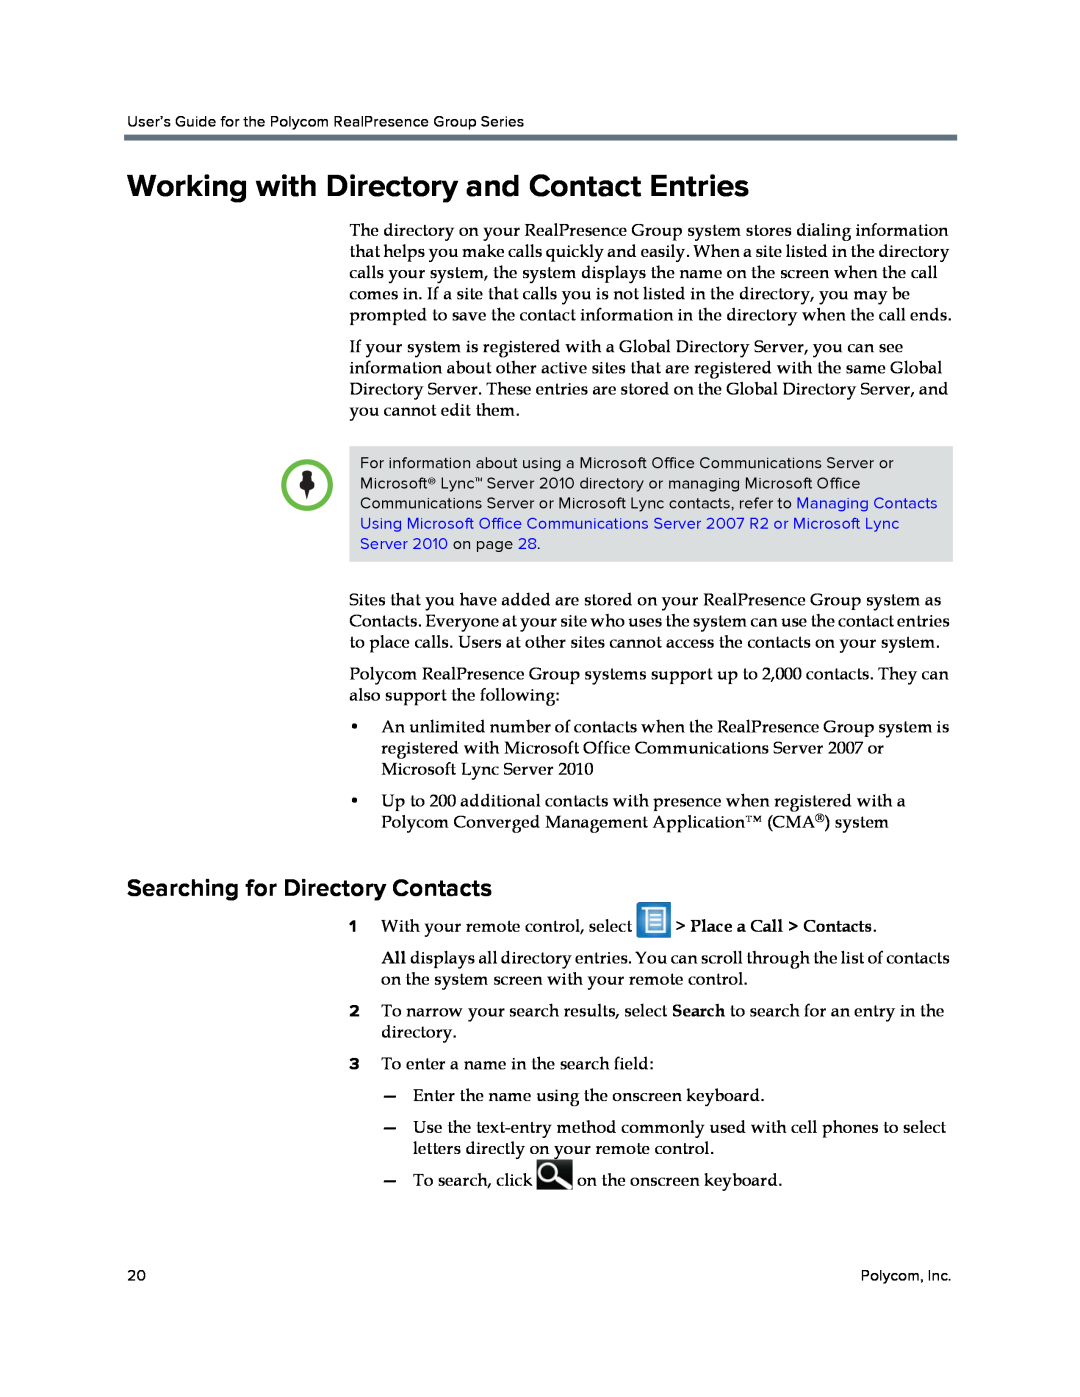 Polycom P001 manual Working with Directory and Contact Entries, Searching for Directory Contacts, Server 2010 on page 